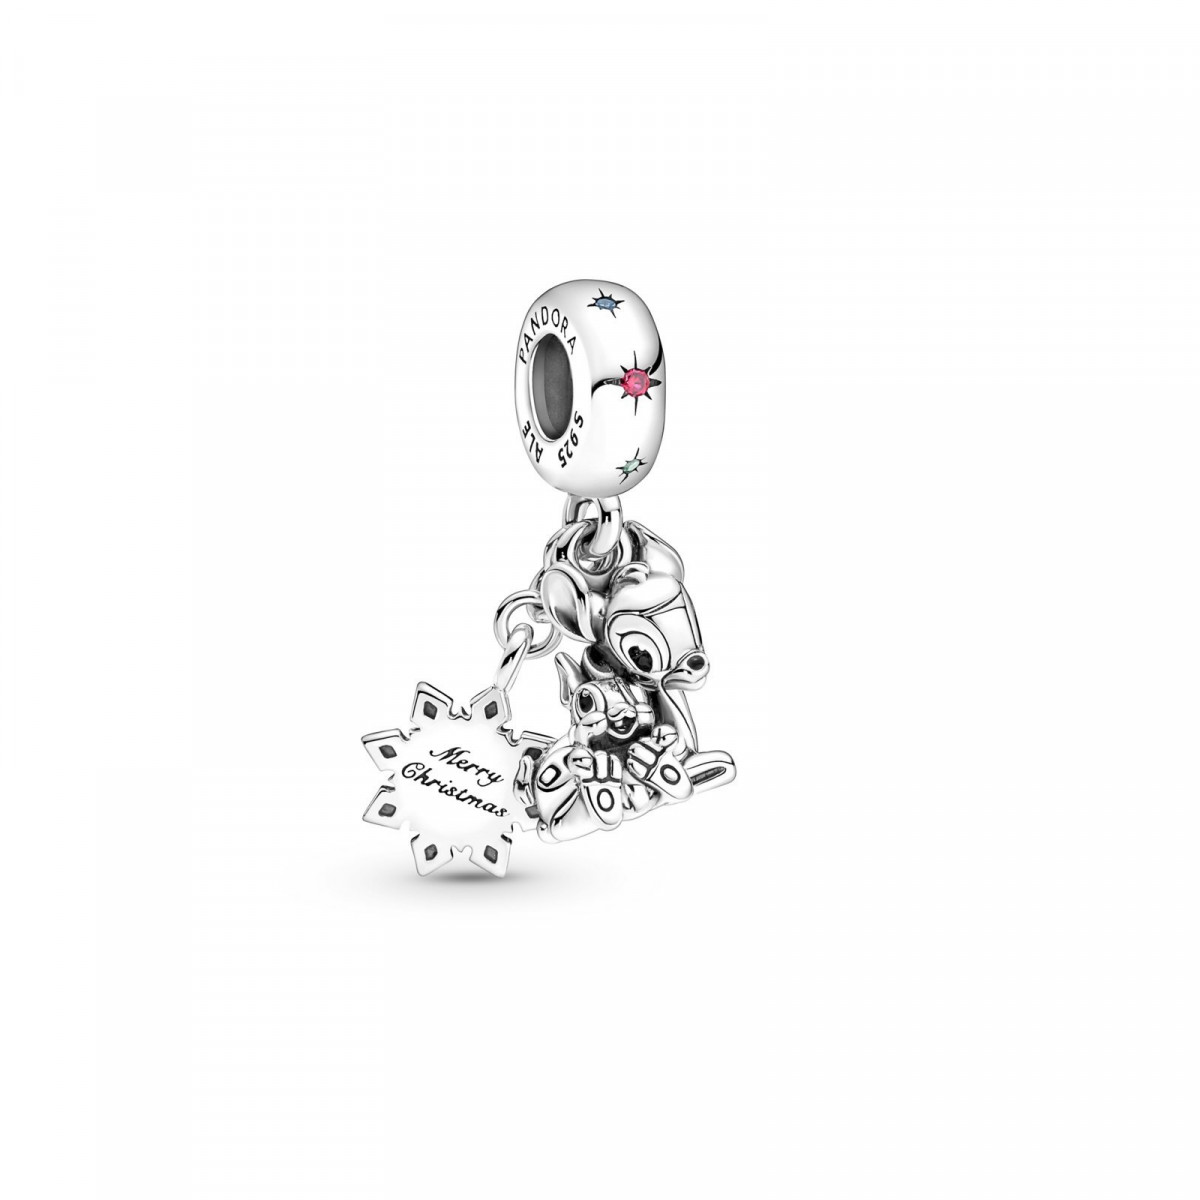 PANDORA DISNEY BAMBI AND THUMPER STERLING SILVER DANGLE WITH RED AND FANCY LIGHT BLUE CUBIC ZIRCONIA, ROYAL GREEN CR - 799647C01